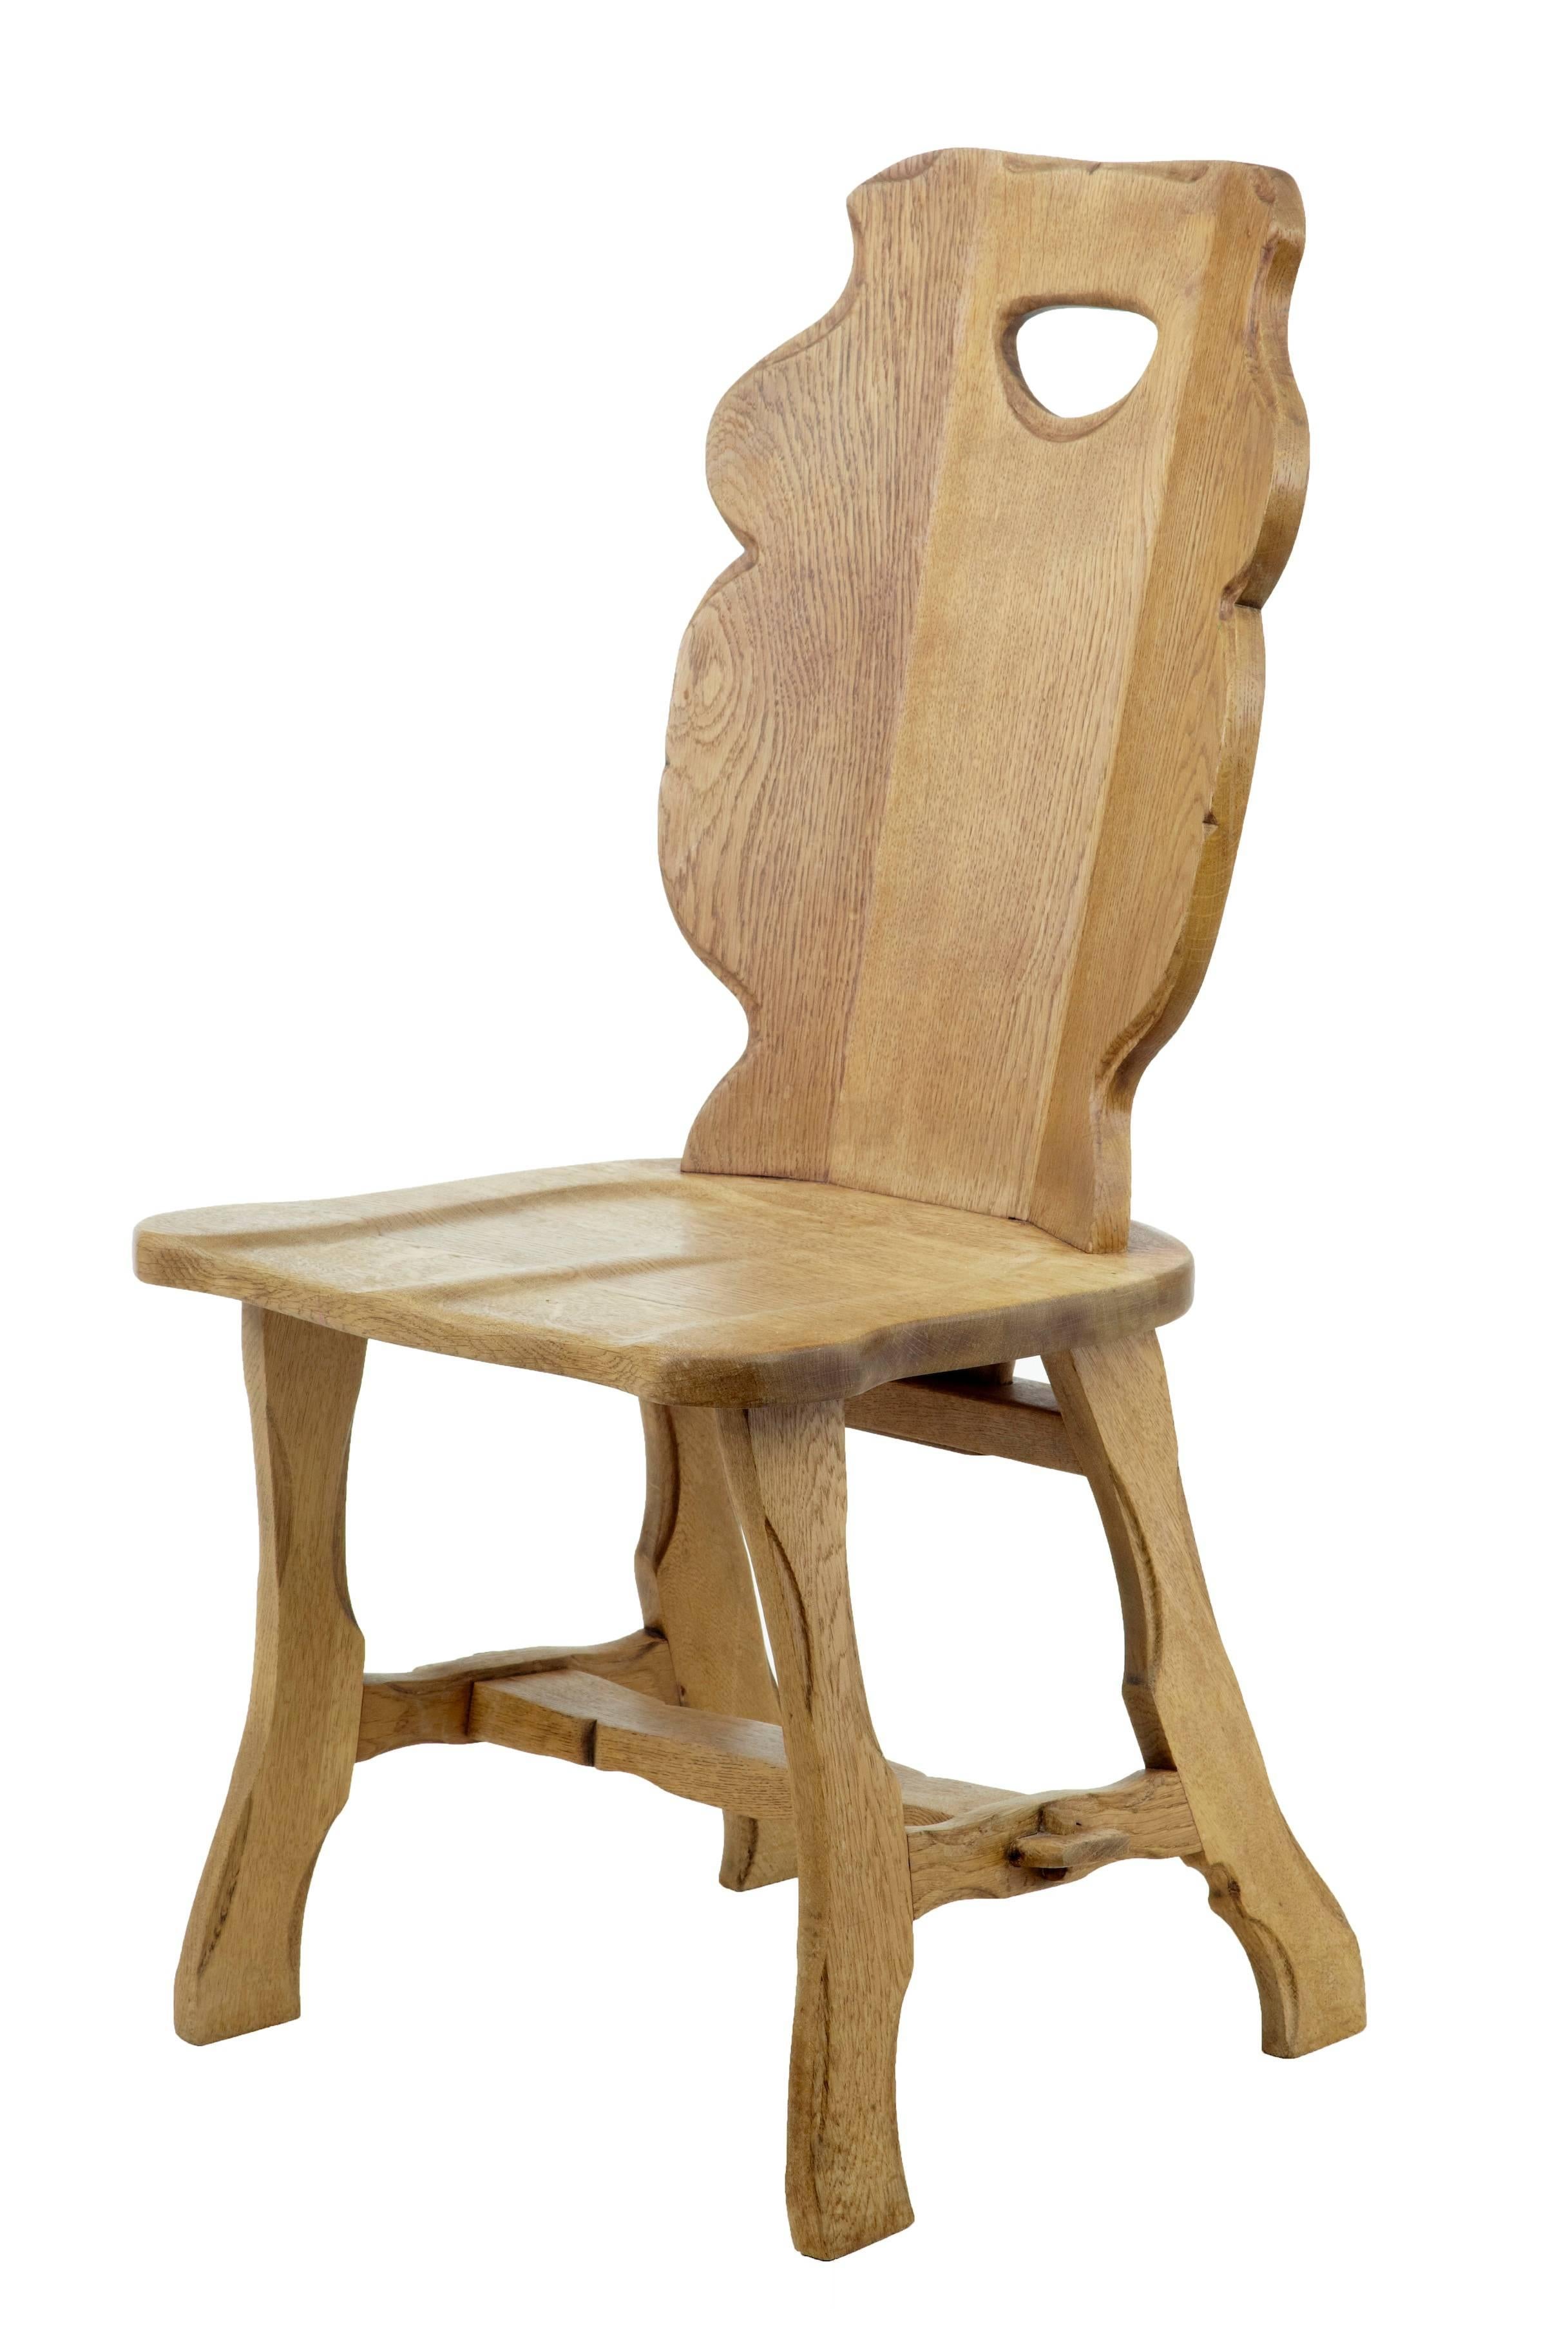 Unusual set of ten solid oak dining chairs, circa 1920.
Dug out backs, with shaped seat.
Very much inspired by the arts and crafts movement.
Legs supported by stretchers and pegs.

Height: 38 3/4